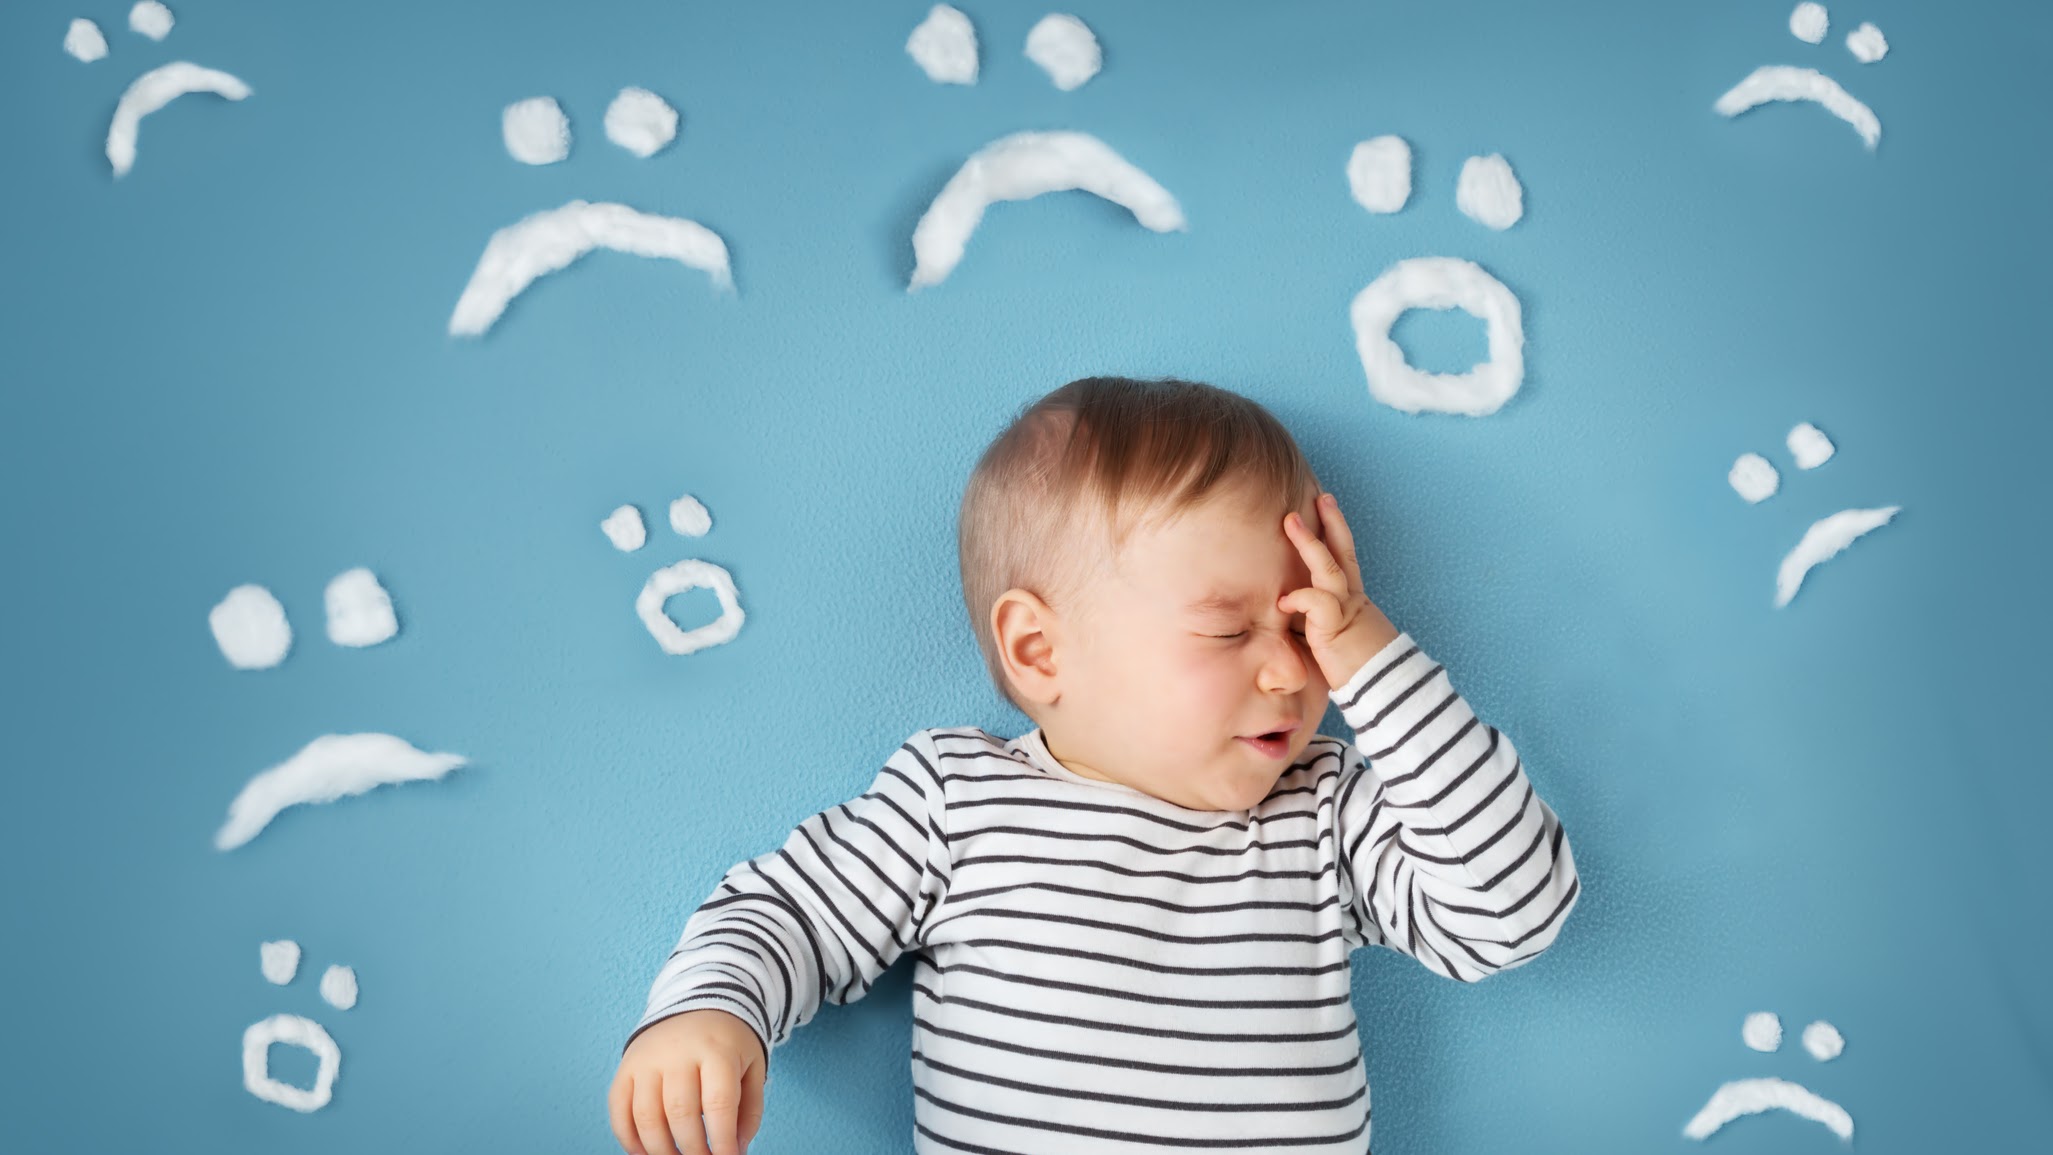 uhappy little boy on blue blanket background with sad smiley faces